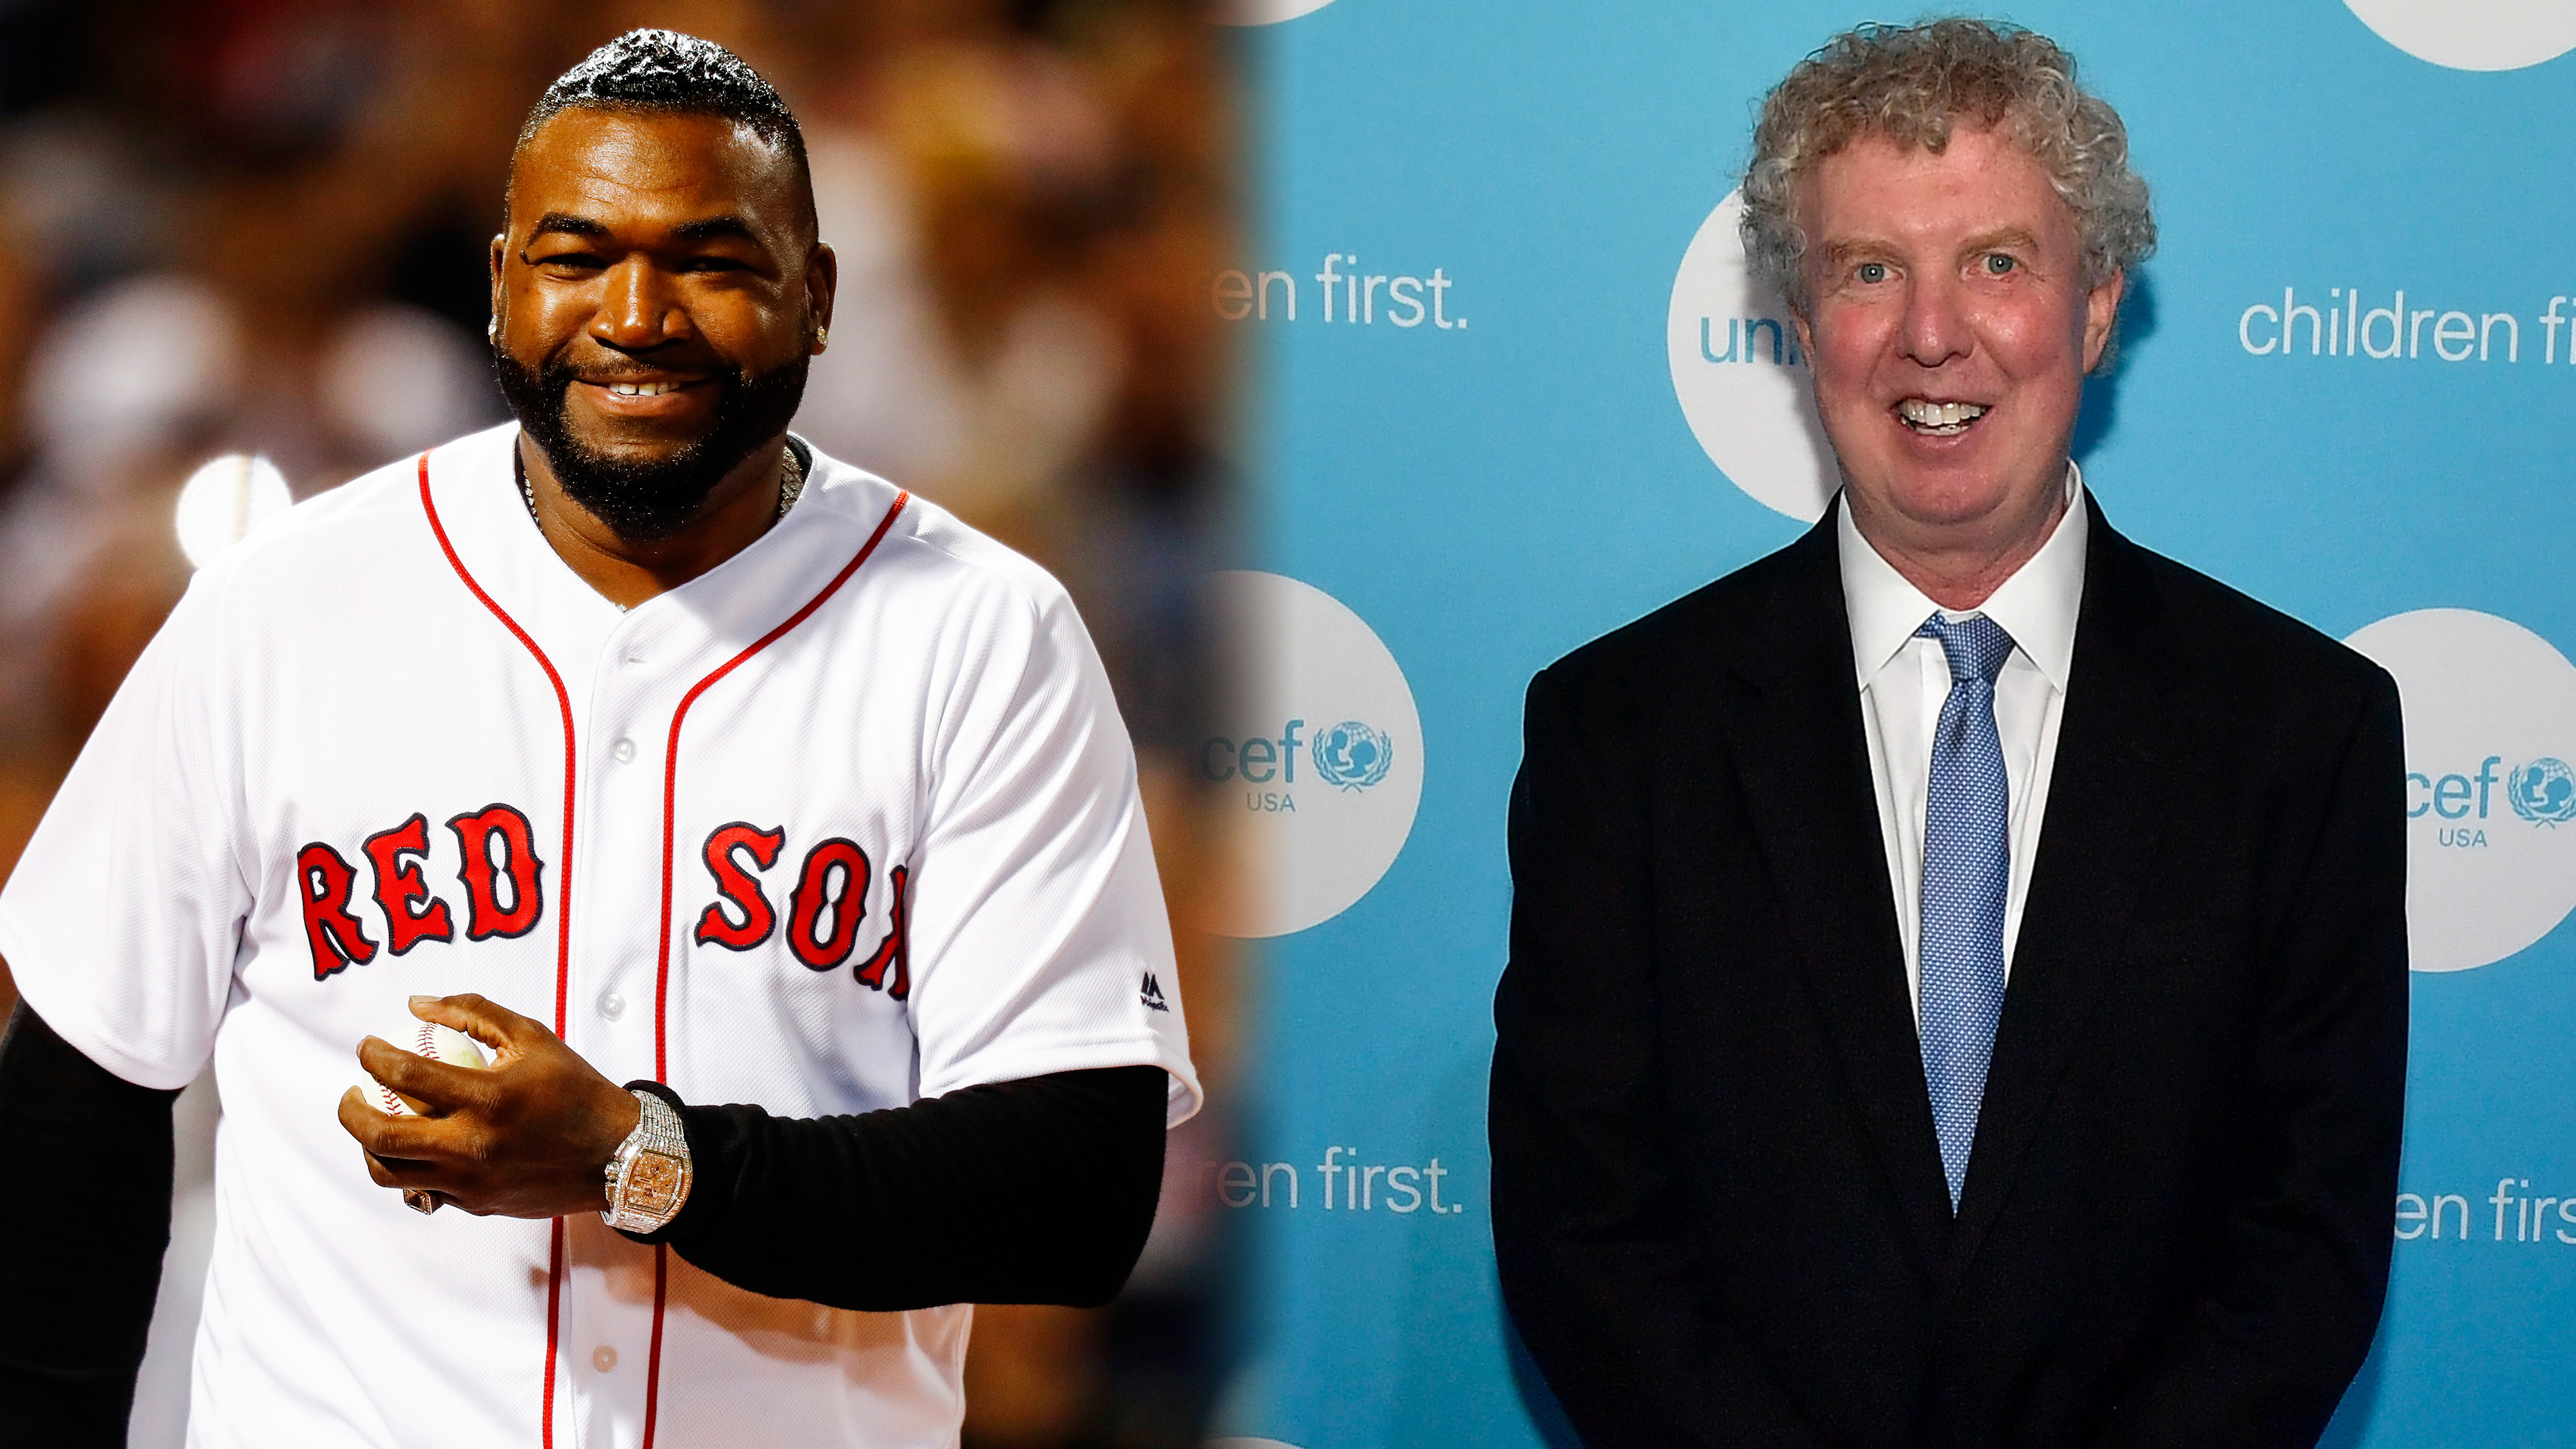 David Ortiz Calls Dan Shaughnessy An A-Hole On Live Radio Over Hall Of Fame Snub